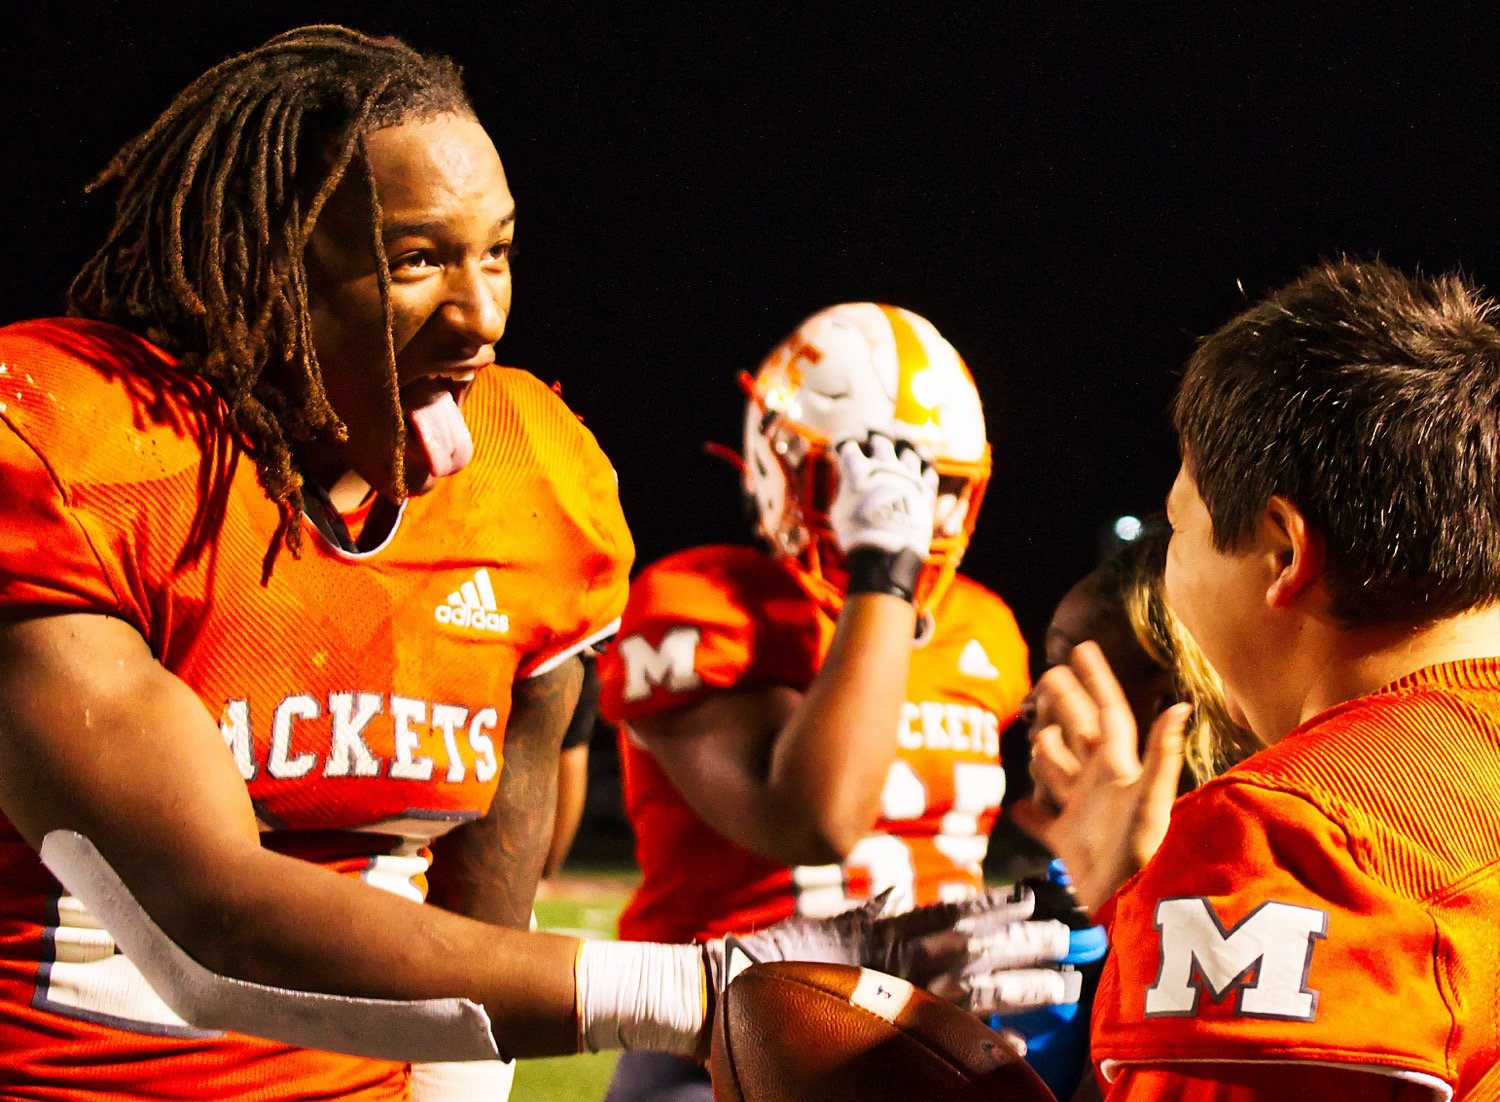 Trevion Sneed, having rung up 301 rushing yards on the night, shares his joy with a ball boy. With a secure lead in the fourth quarter, celebrations began early on the Mineola sidelines Friday night in Princeton.
[prints available of this photo, plus unpublished shots]